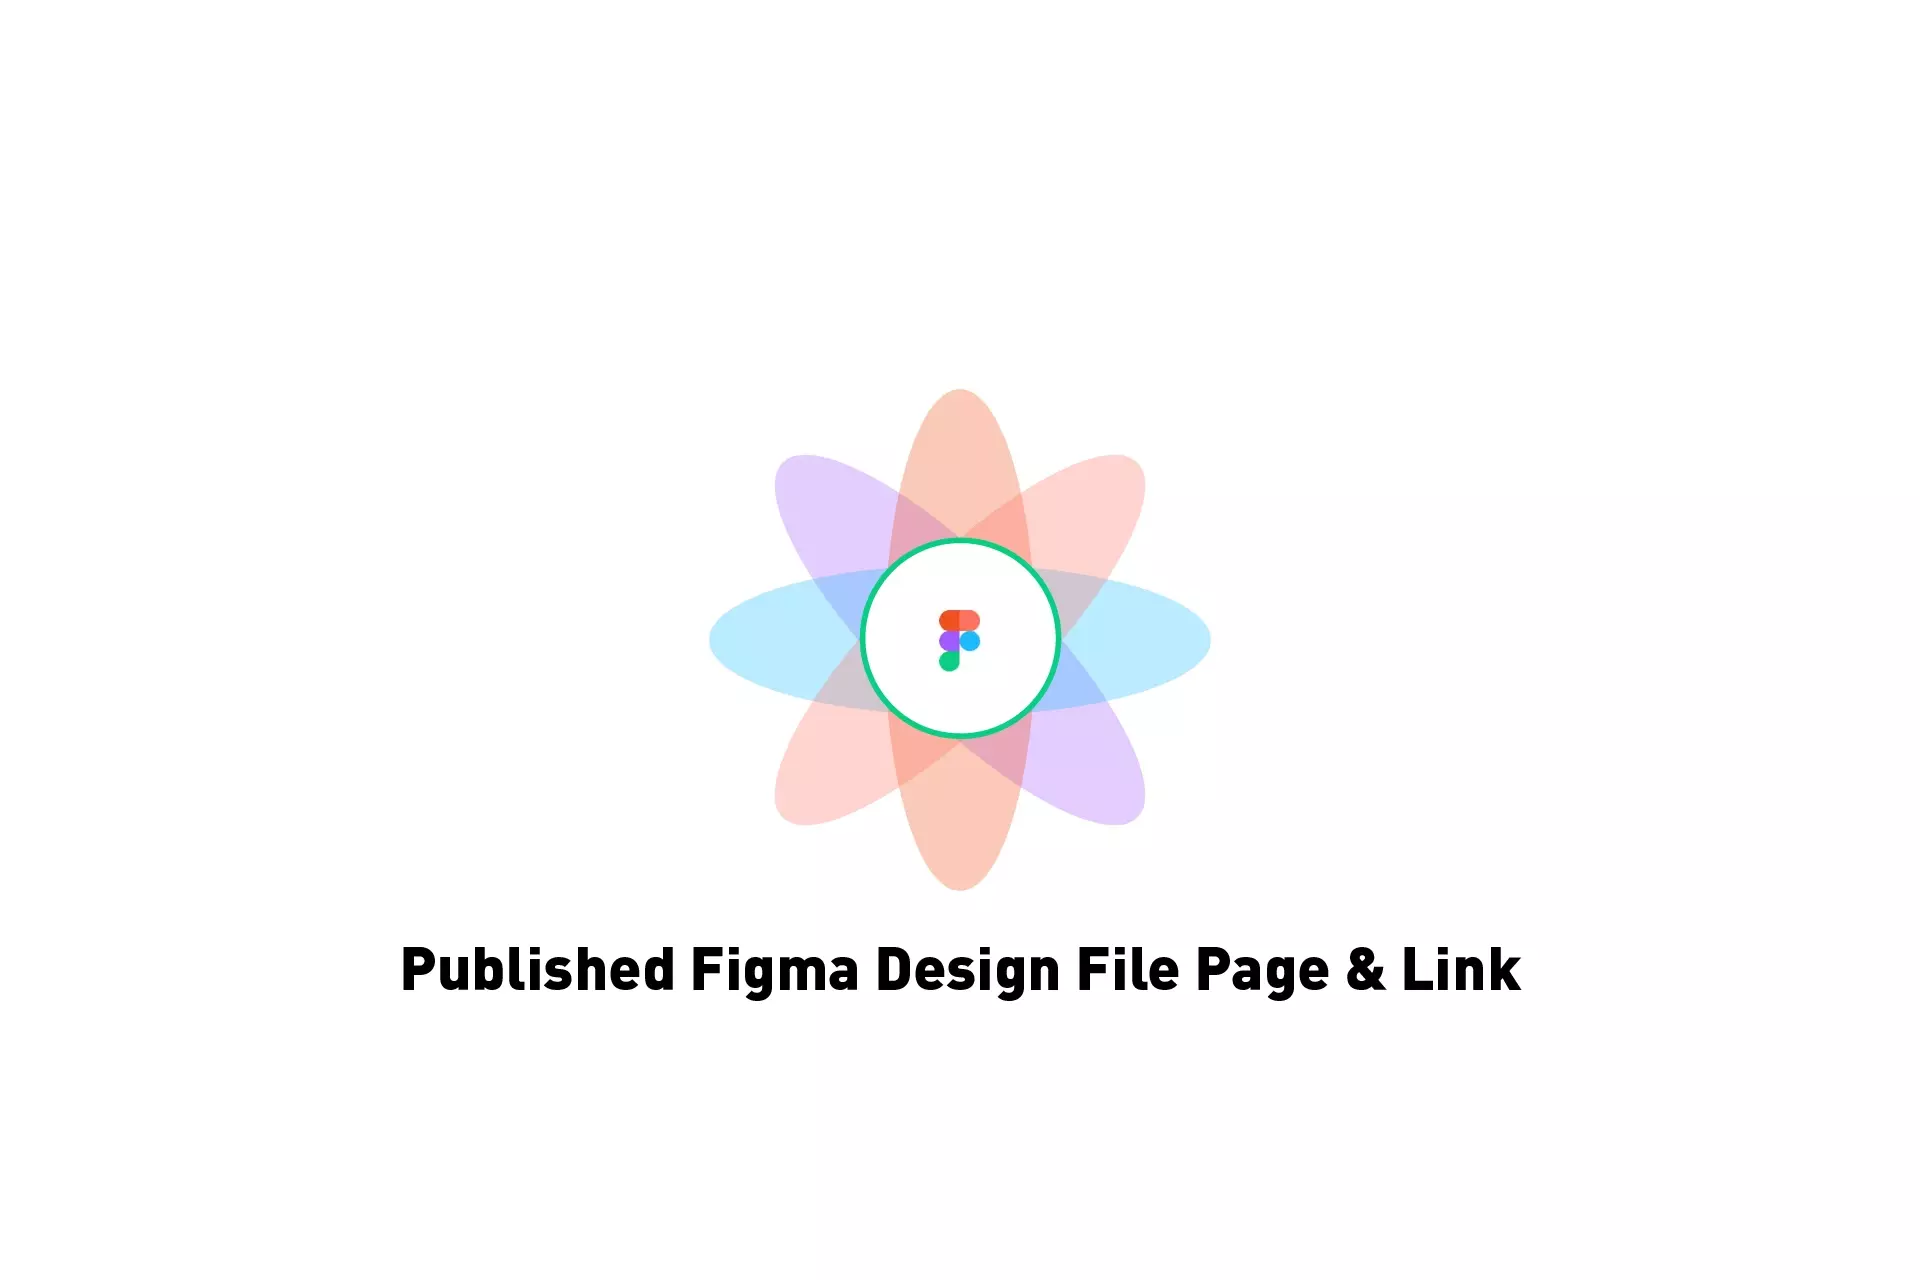 A flower that represents Figma with the text "Published Figma Design File Page & Link" beneath it.